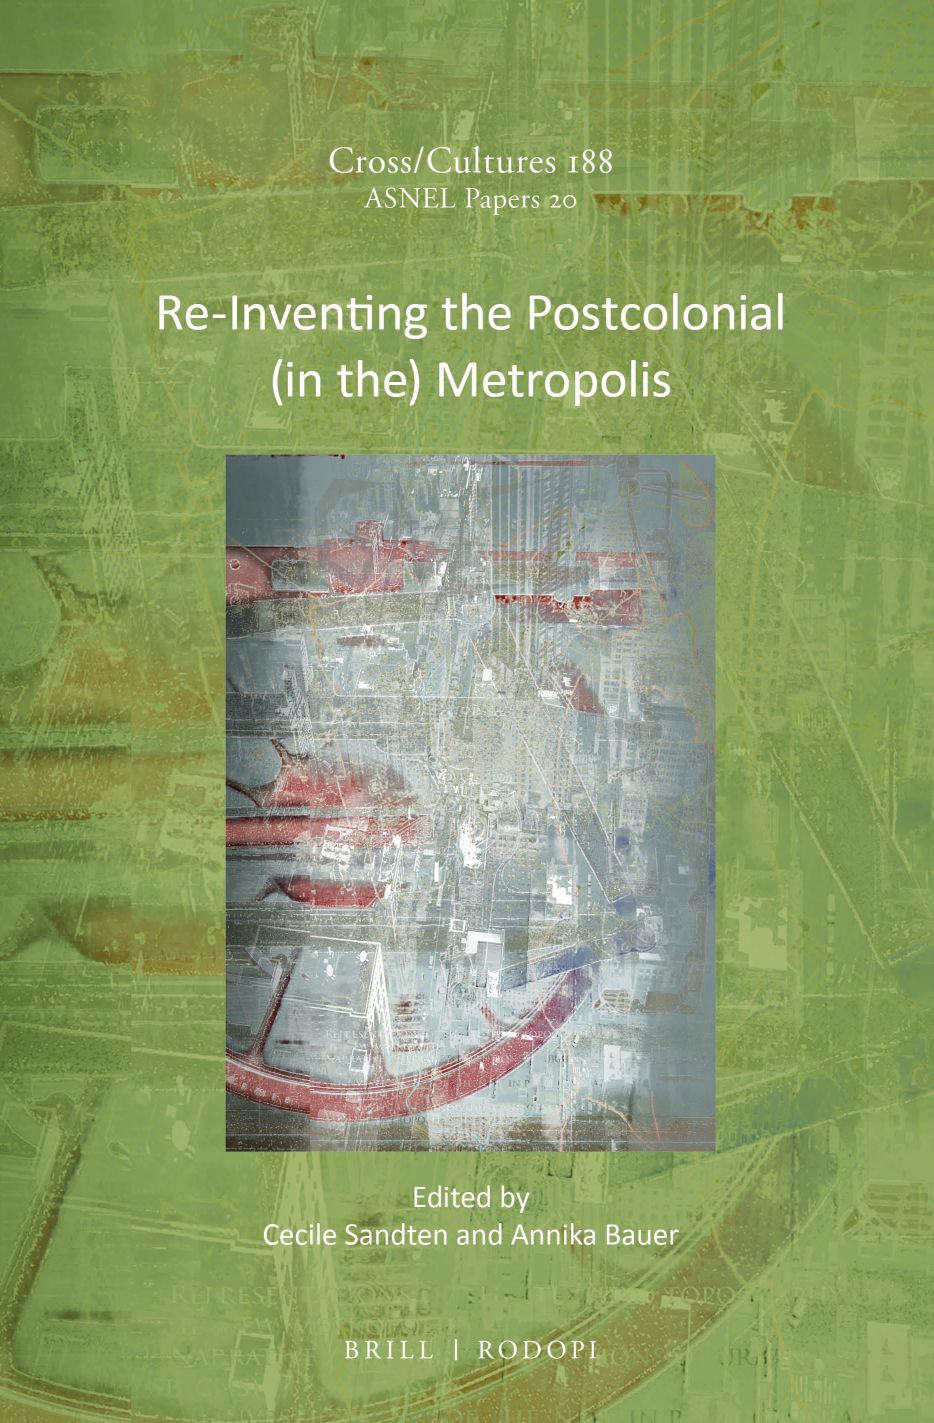 Cover of the book Re-Inventing the Postcolonial in the Metropolis